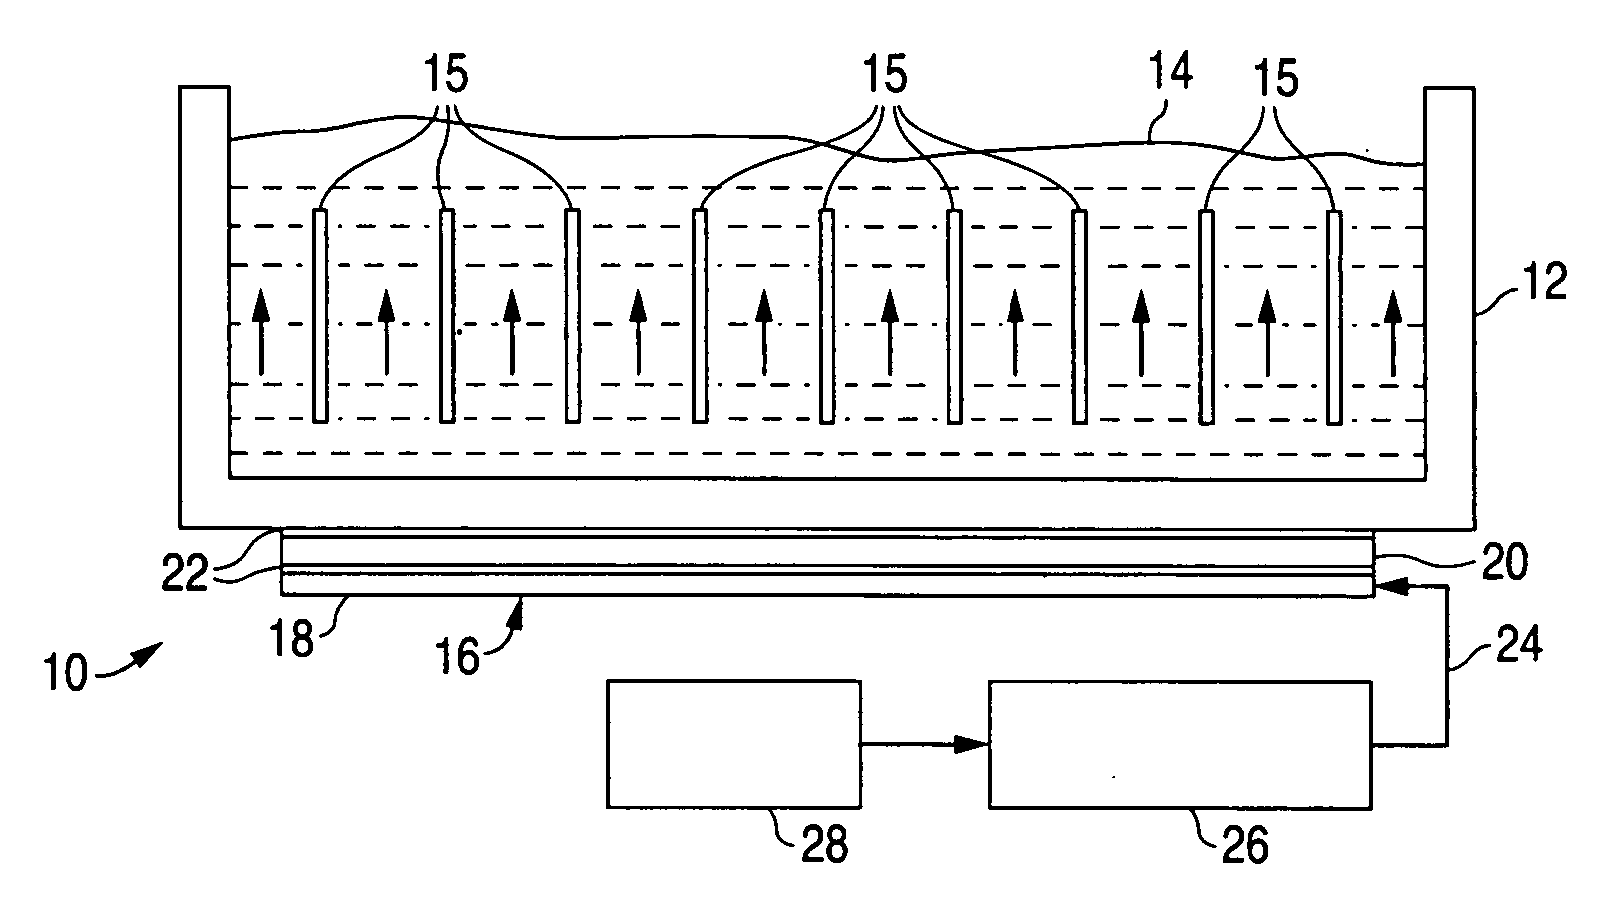 Megasonic processing apparatus with frequency sweeping of thickness mode transducers